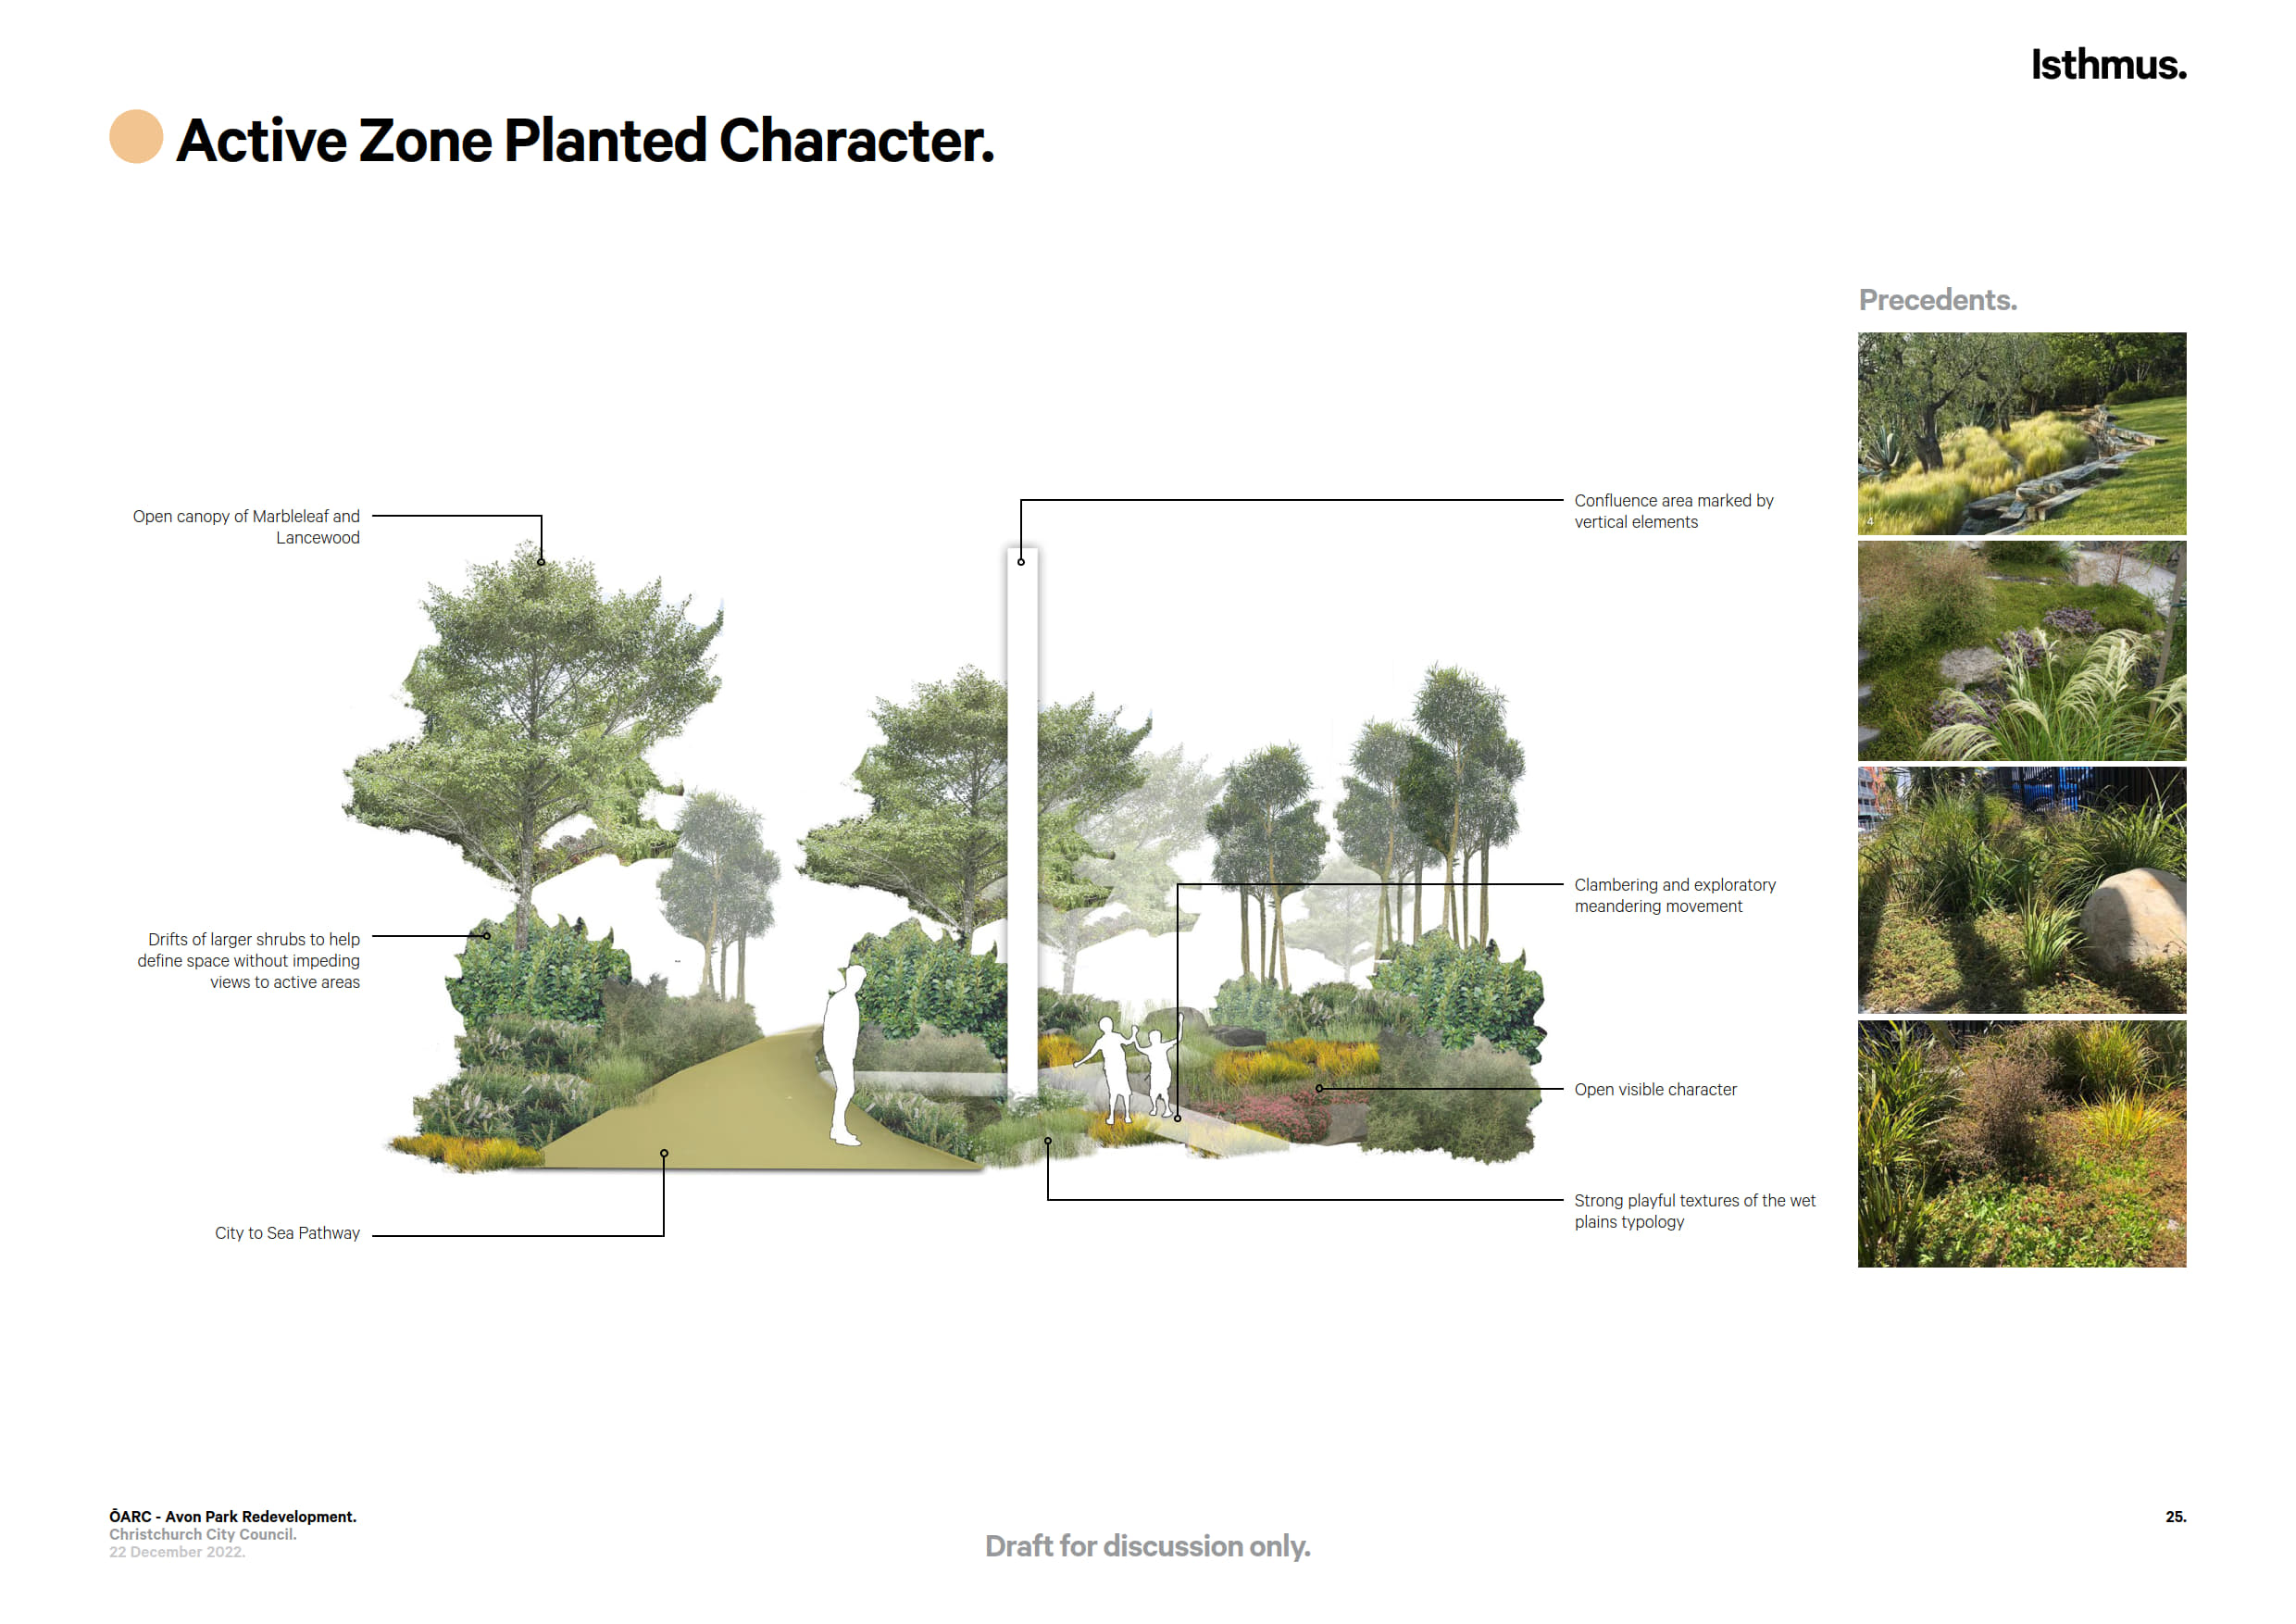 Active zone planted character